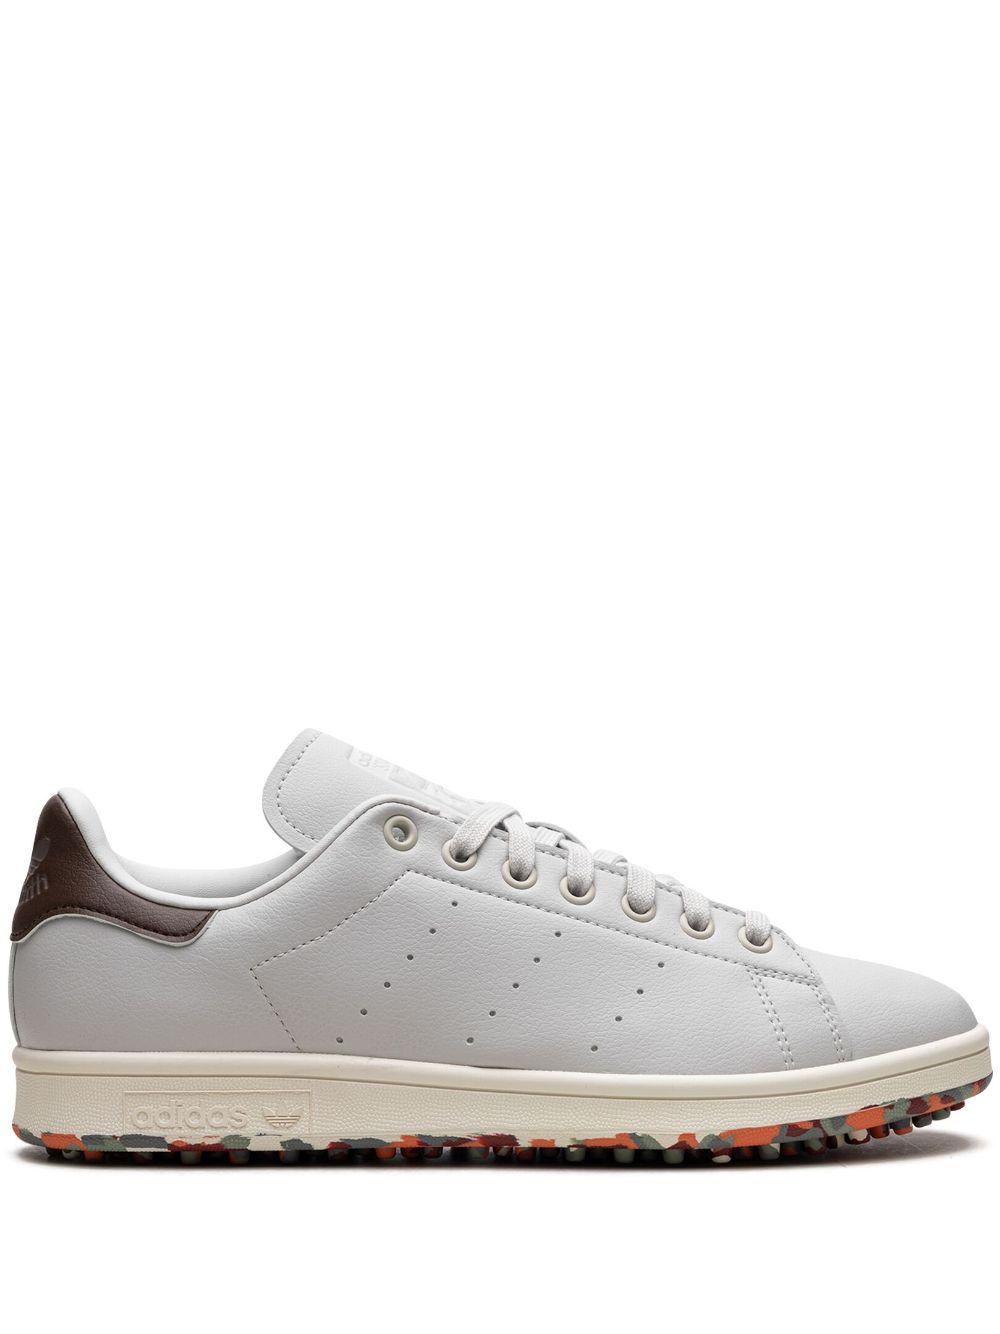 Adidas Stan Smith Golf "Grey Brown" sneakers